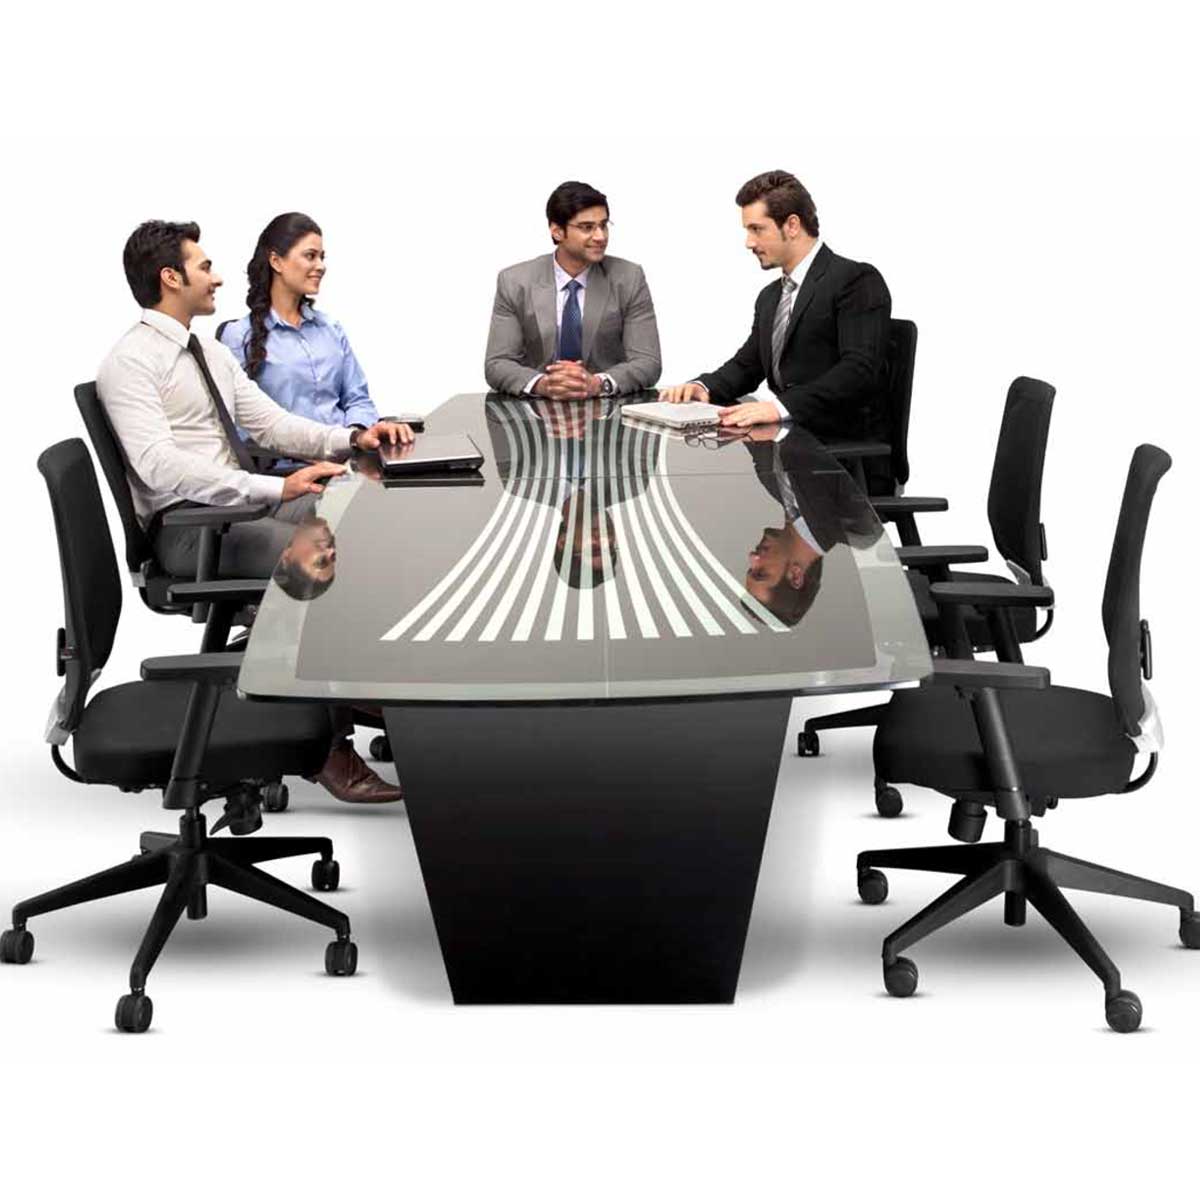 Metal Office Table Manufacturers, Suppliers in Rohini Sector 5